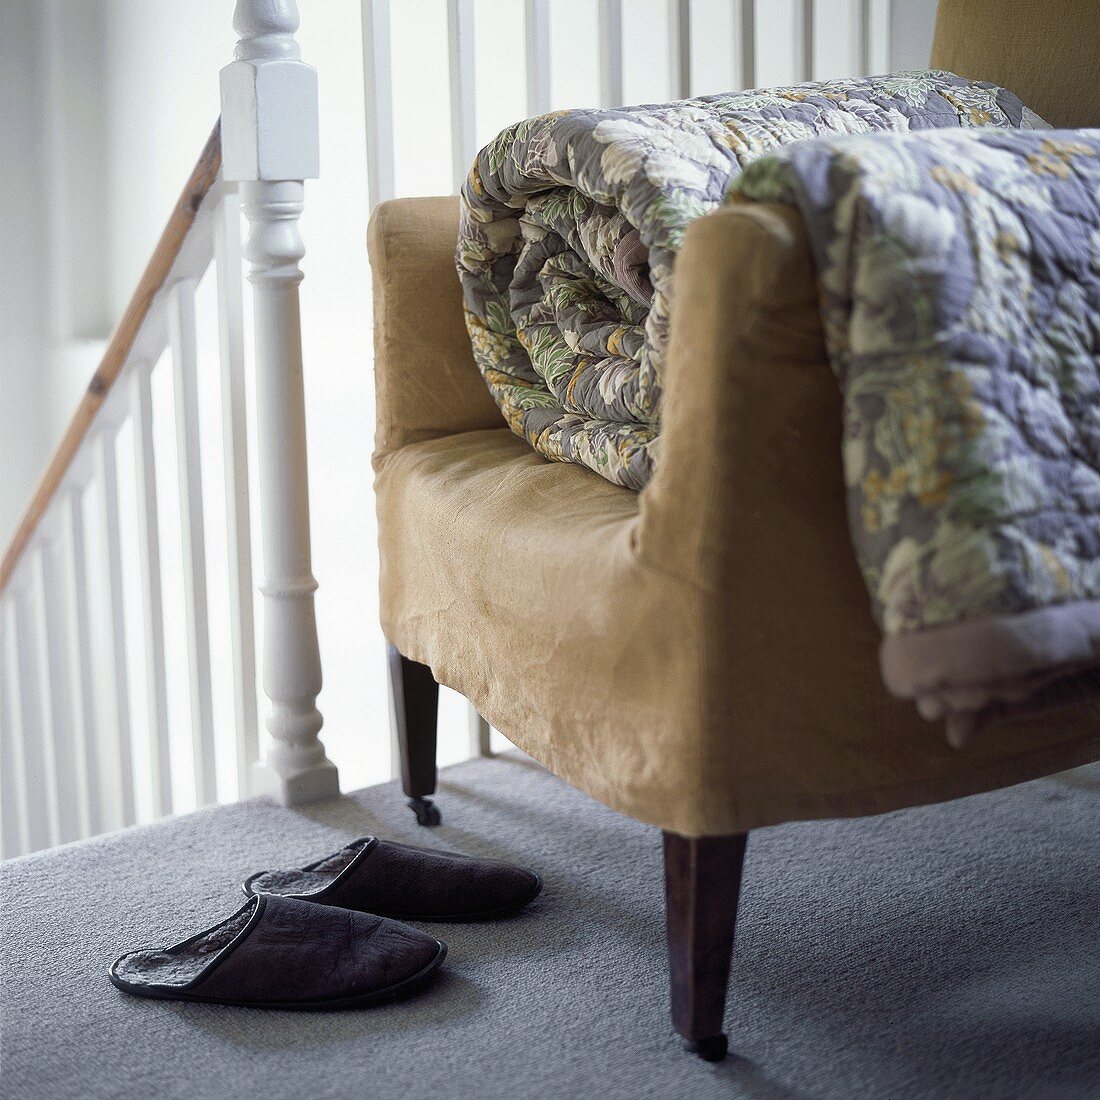 An armchair with a throw blanket and house slippers on the landing